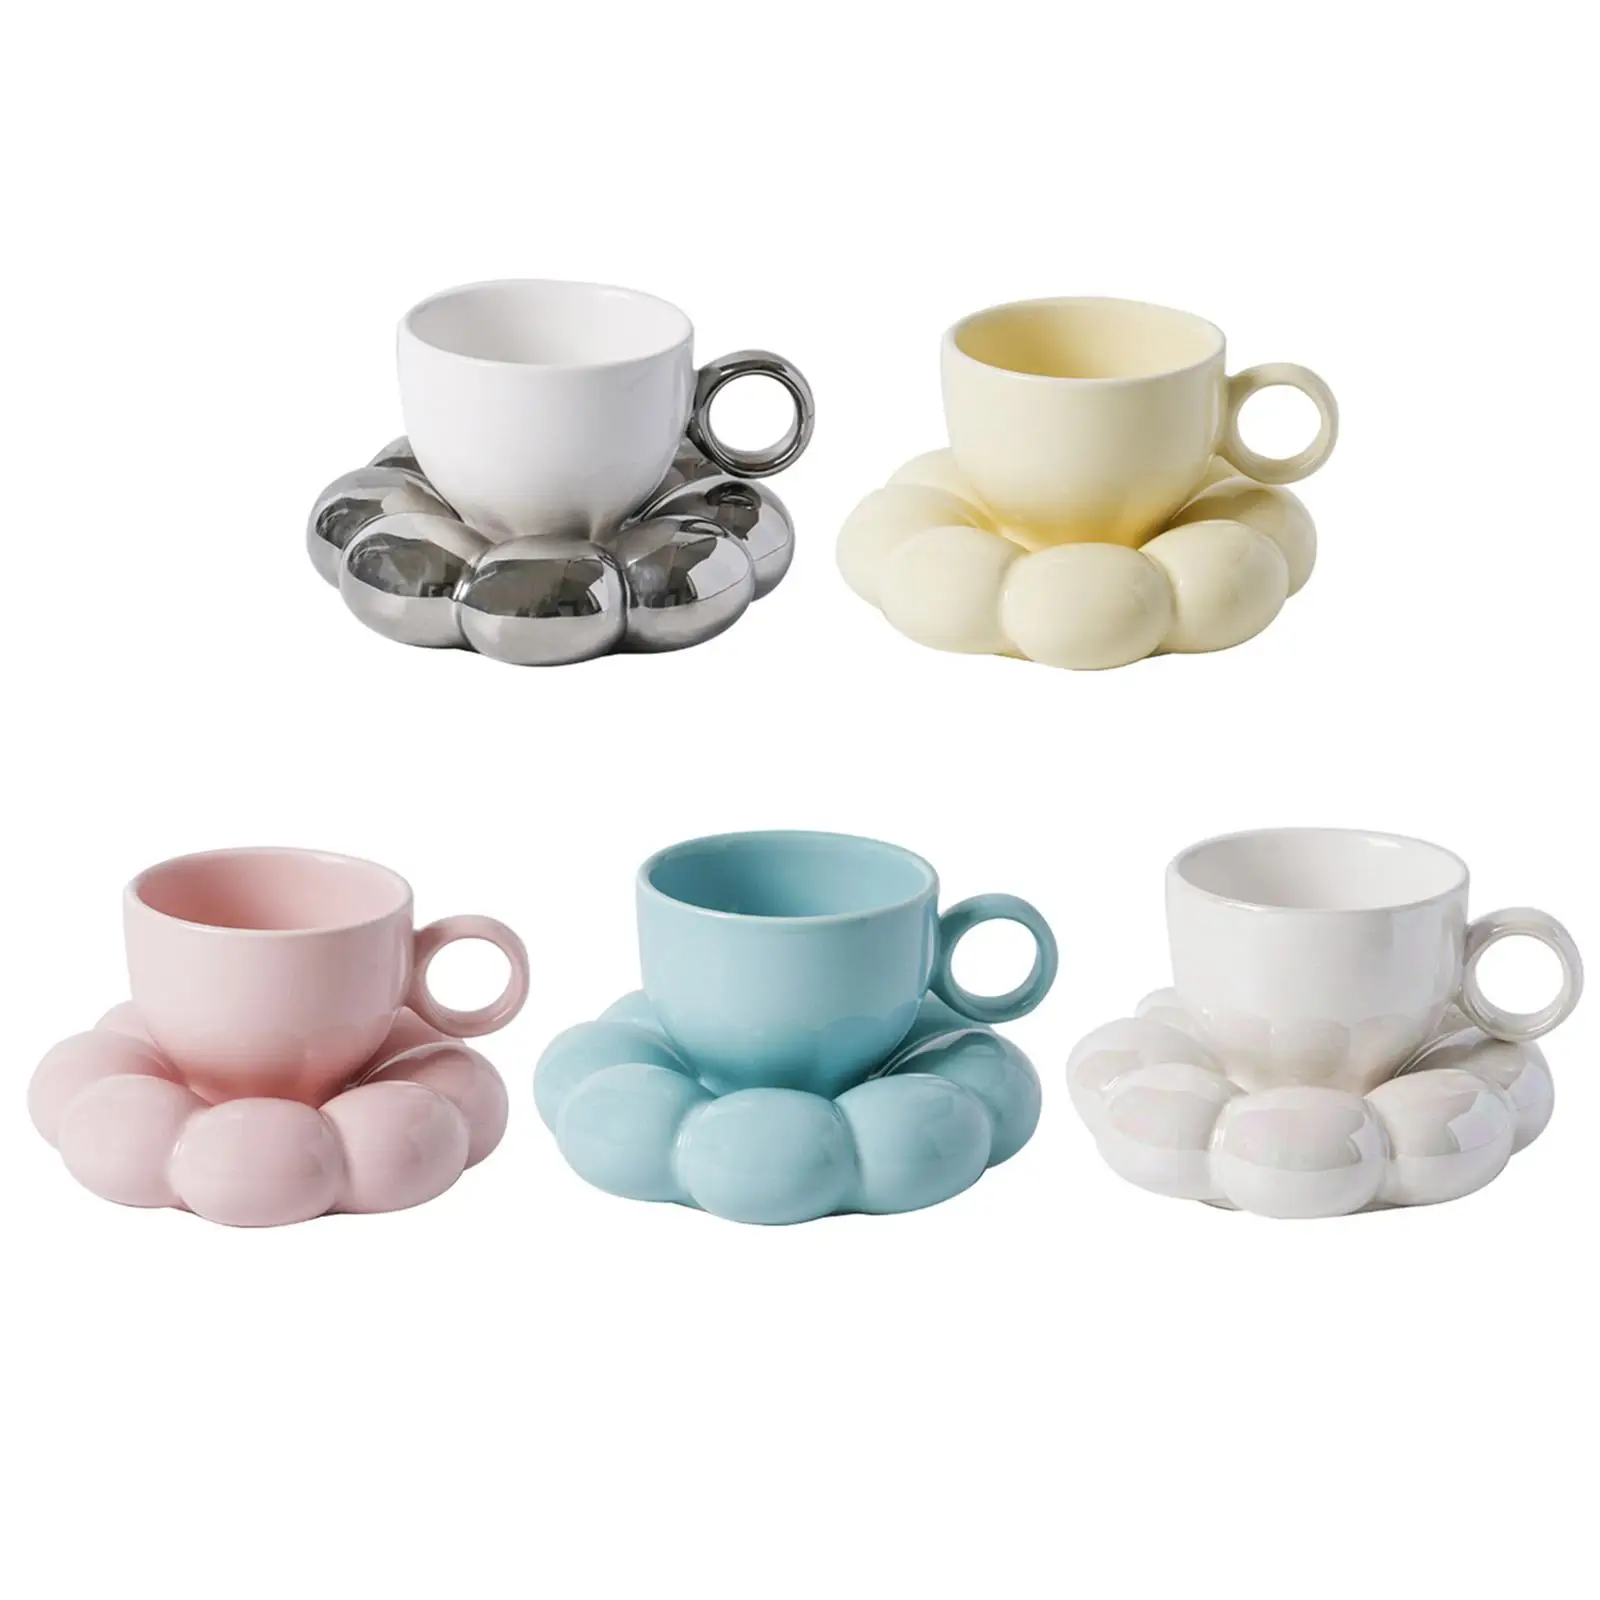 Ceramic Coffee Mug and Set with Handle Anti-Skid Photo Prop Creative Exquisite for Home Office Afternoon Tea Cappuccino